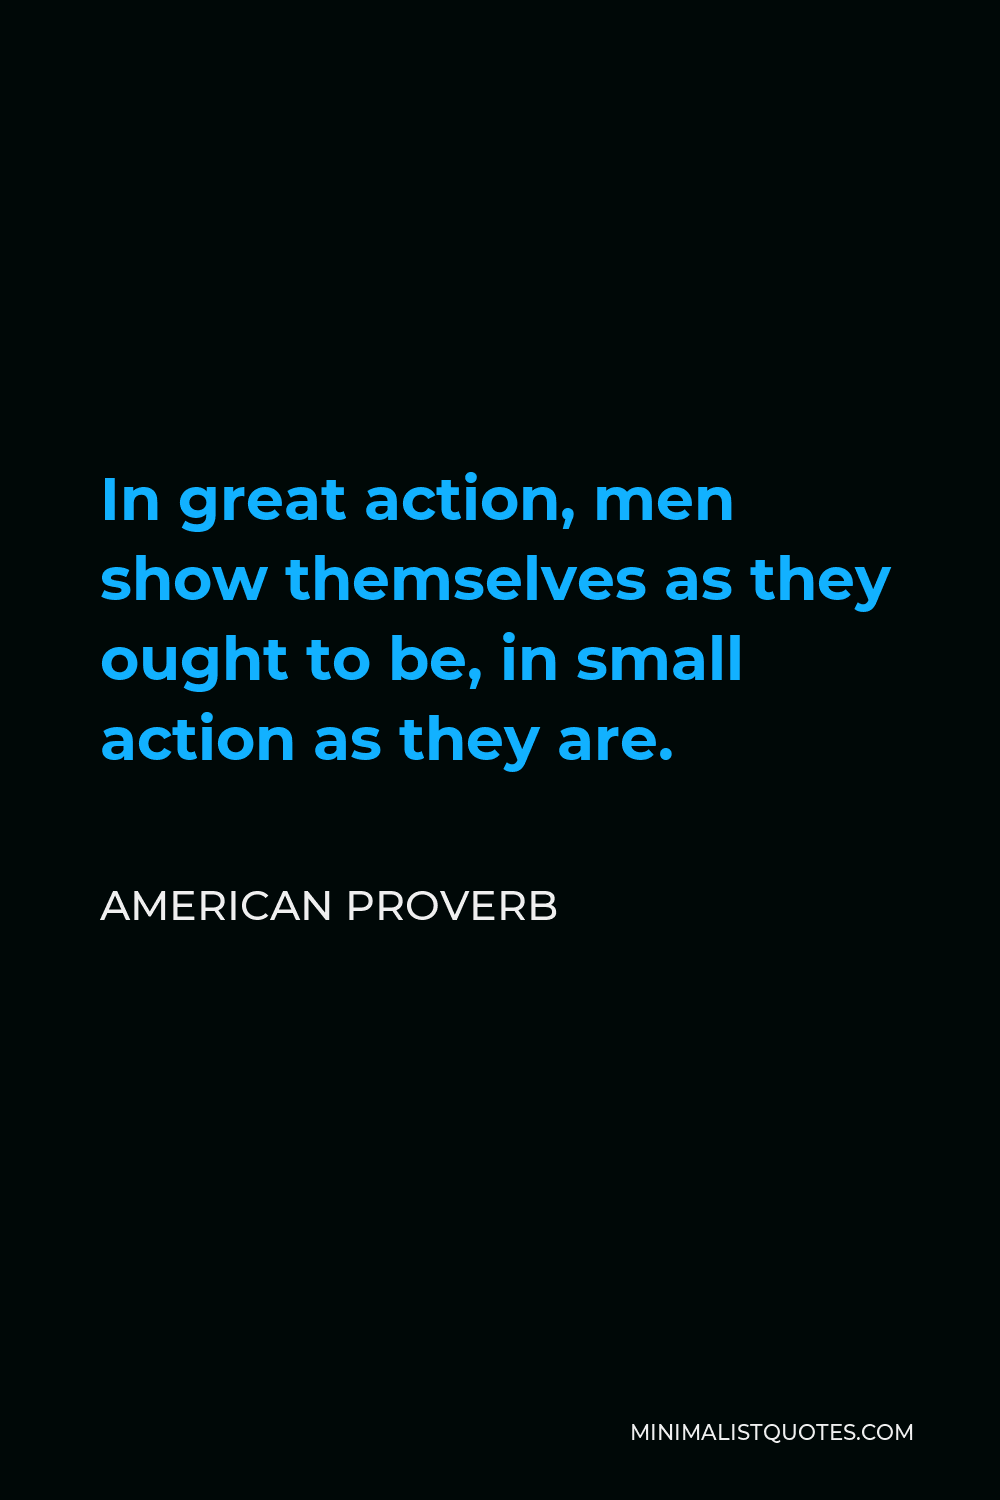 American Proverb Quote - In great action, men show themselves as they ought to be, in small action as they are.